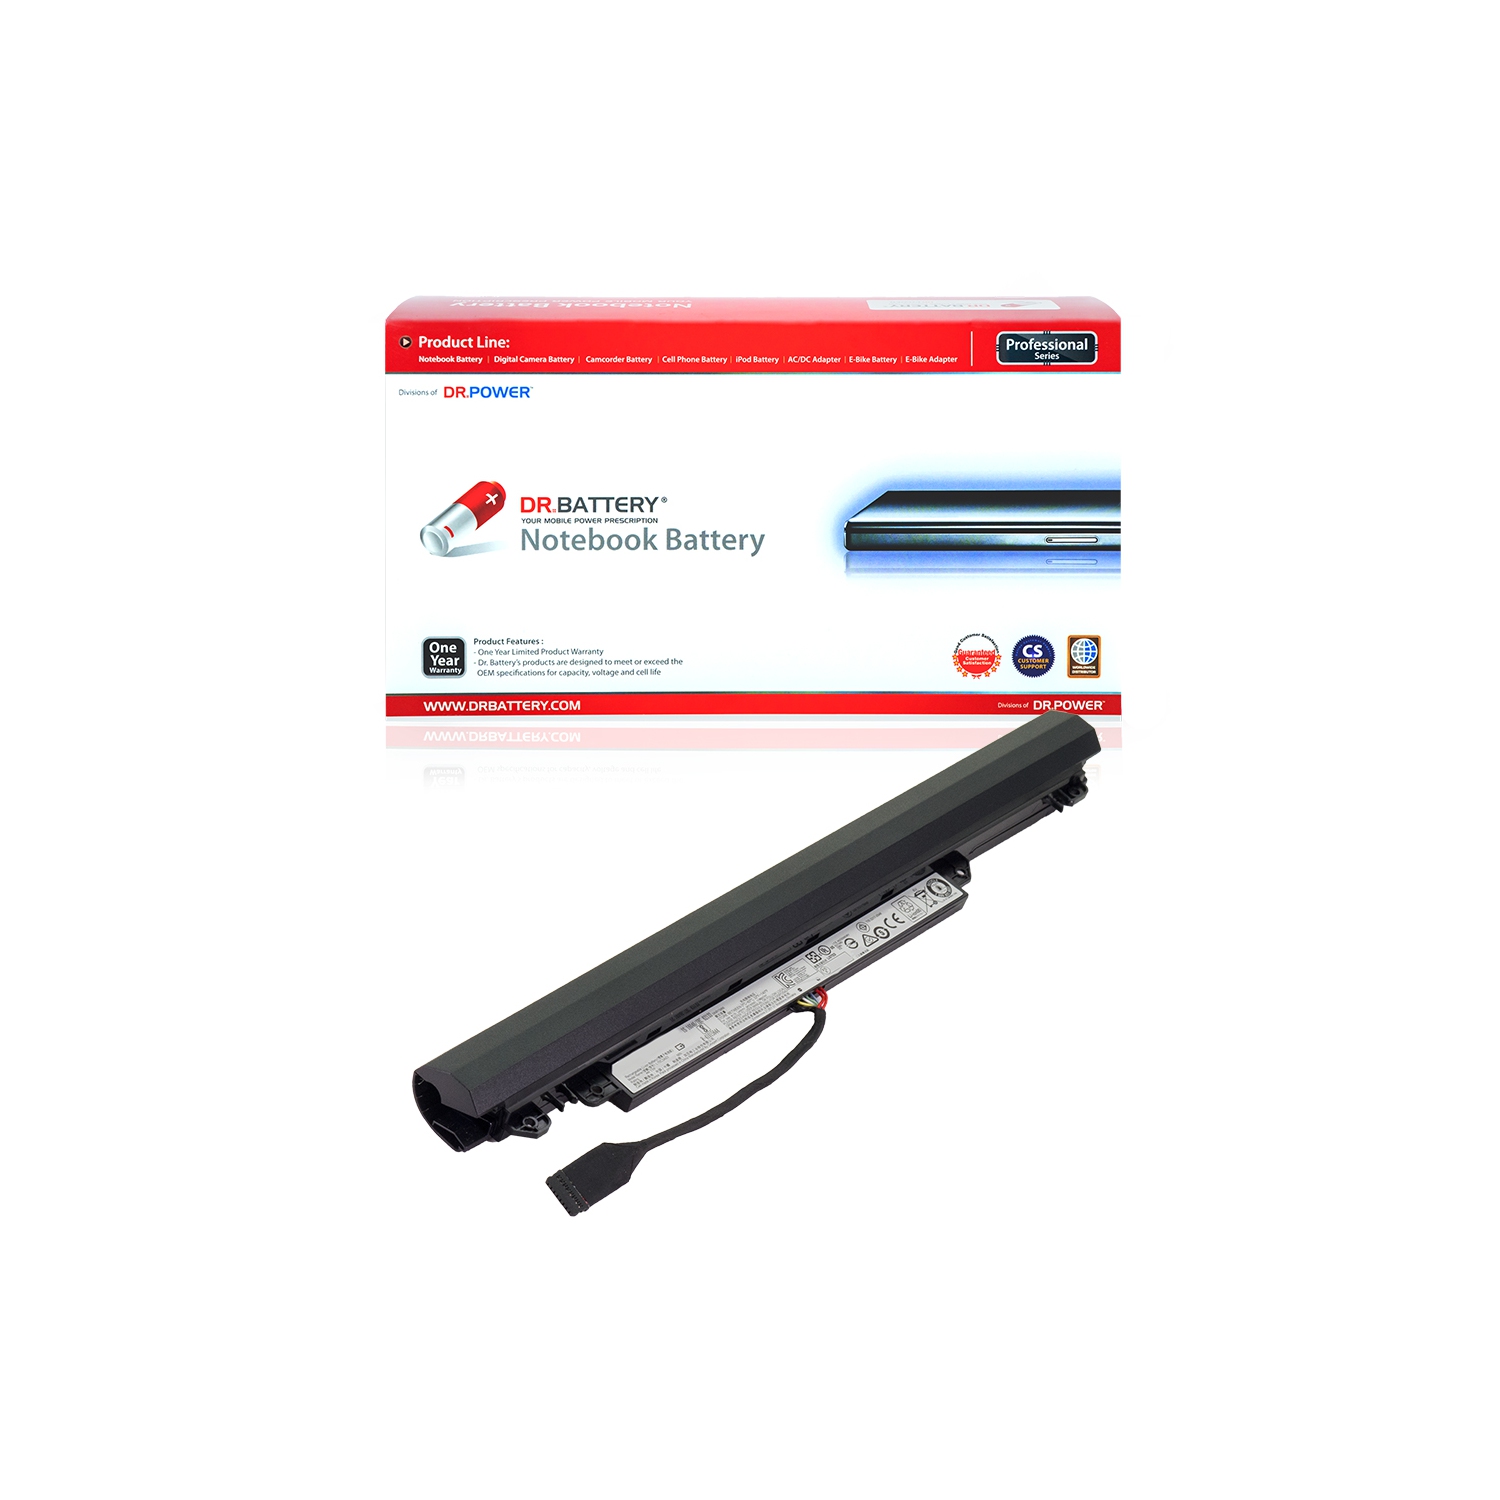 DR. BATTERY - Replacement for Lenovo IdeaPad 110 80V70007US / 110-14IBR / 110-14IBR(80T6) / 5B10L04166 / 5B10L04215